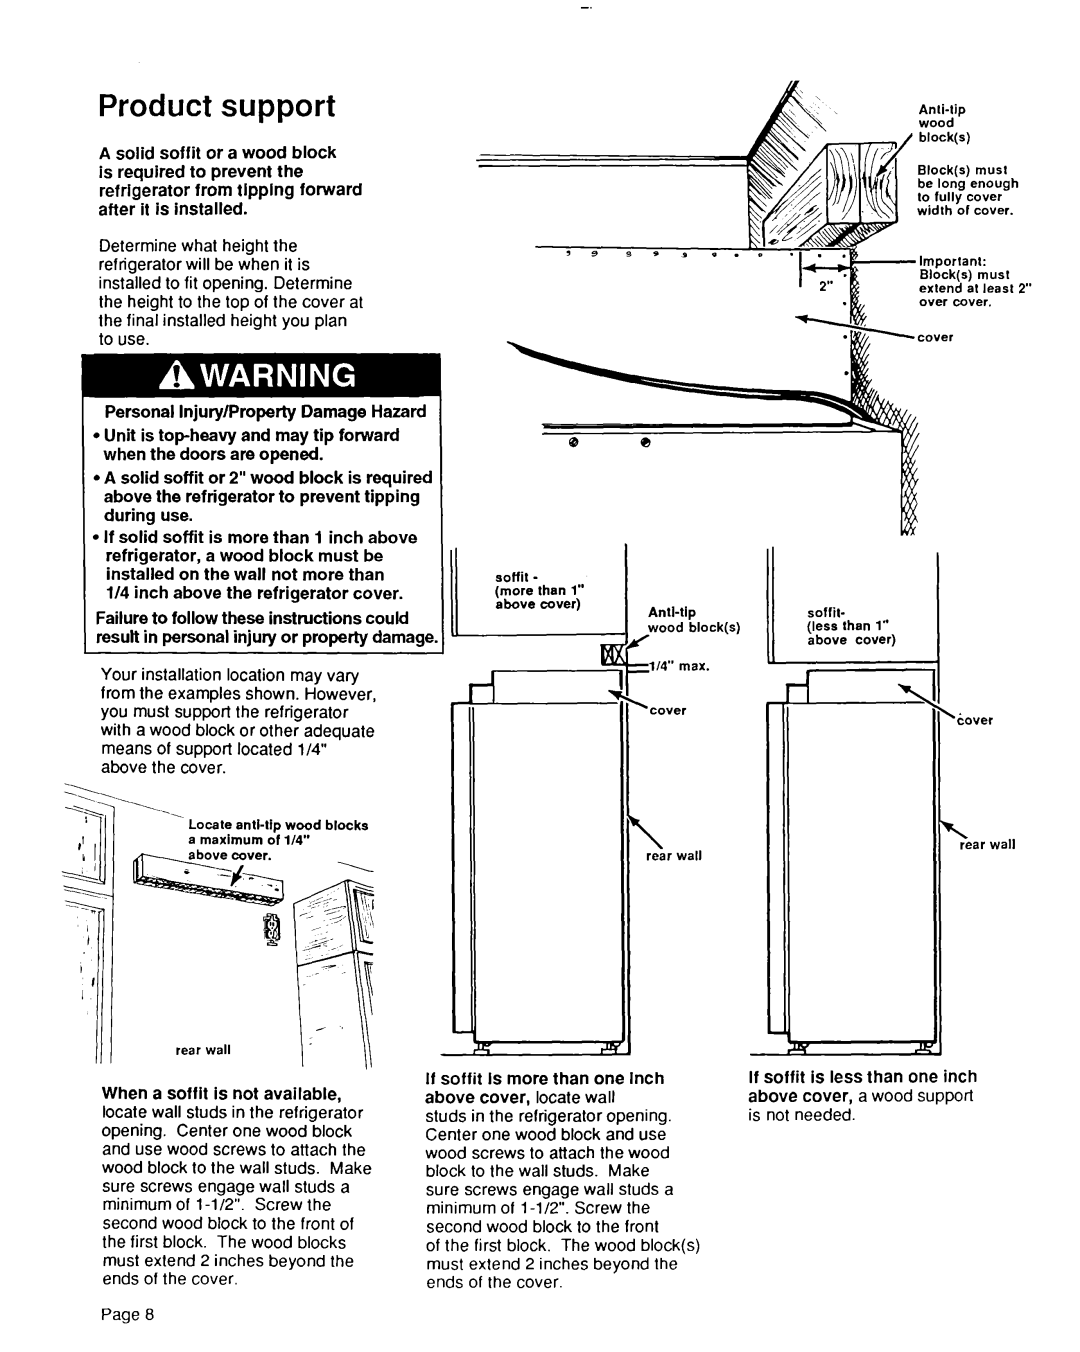 KitchenAid 2000495 installation instructions Product support 